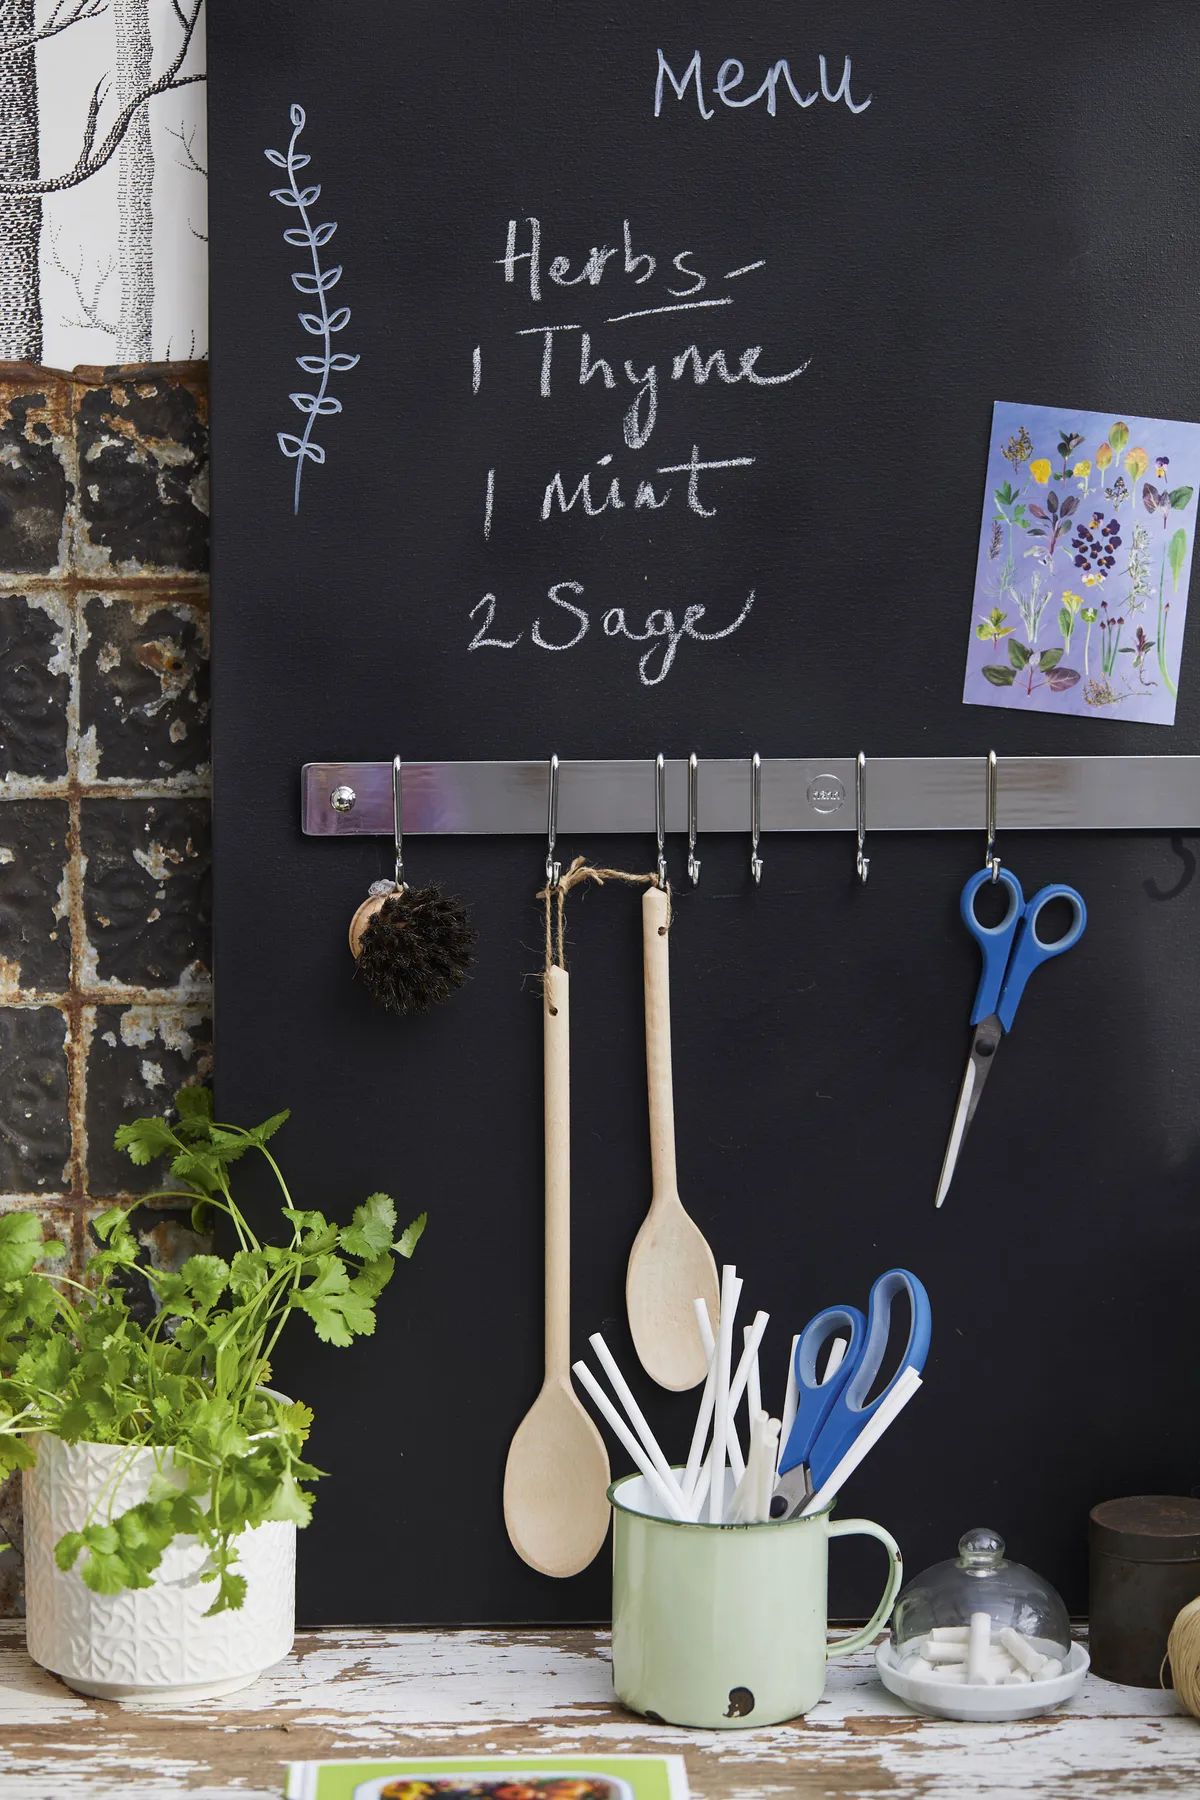 Good idea! Create a memoboard by spray painting a stretched canvas or piece of MDF with chalkboard paint – Kiara’s handy rail is screwed into the canvas framework